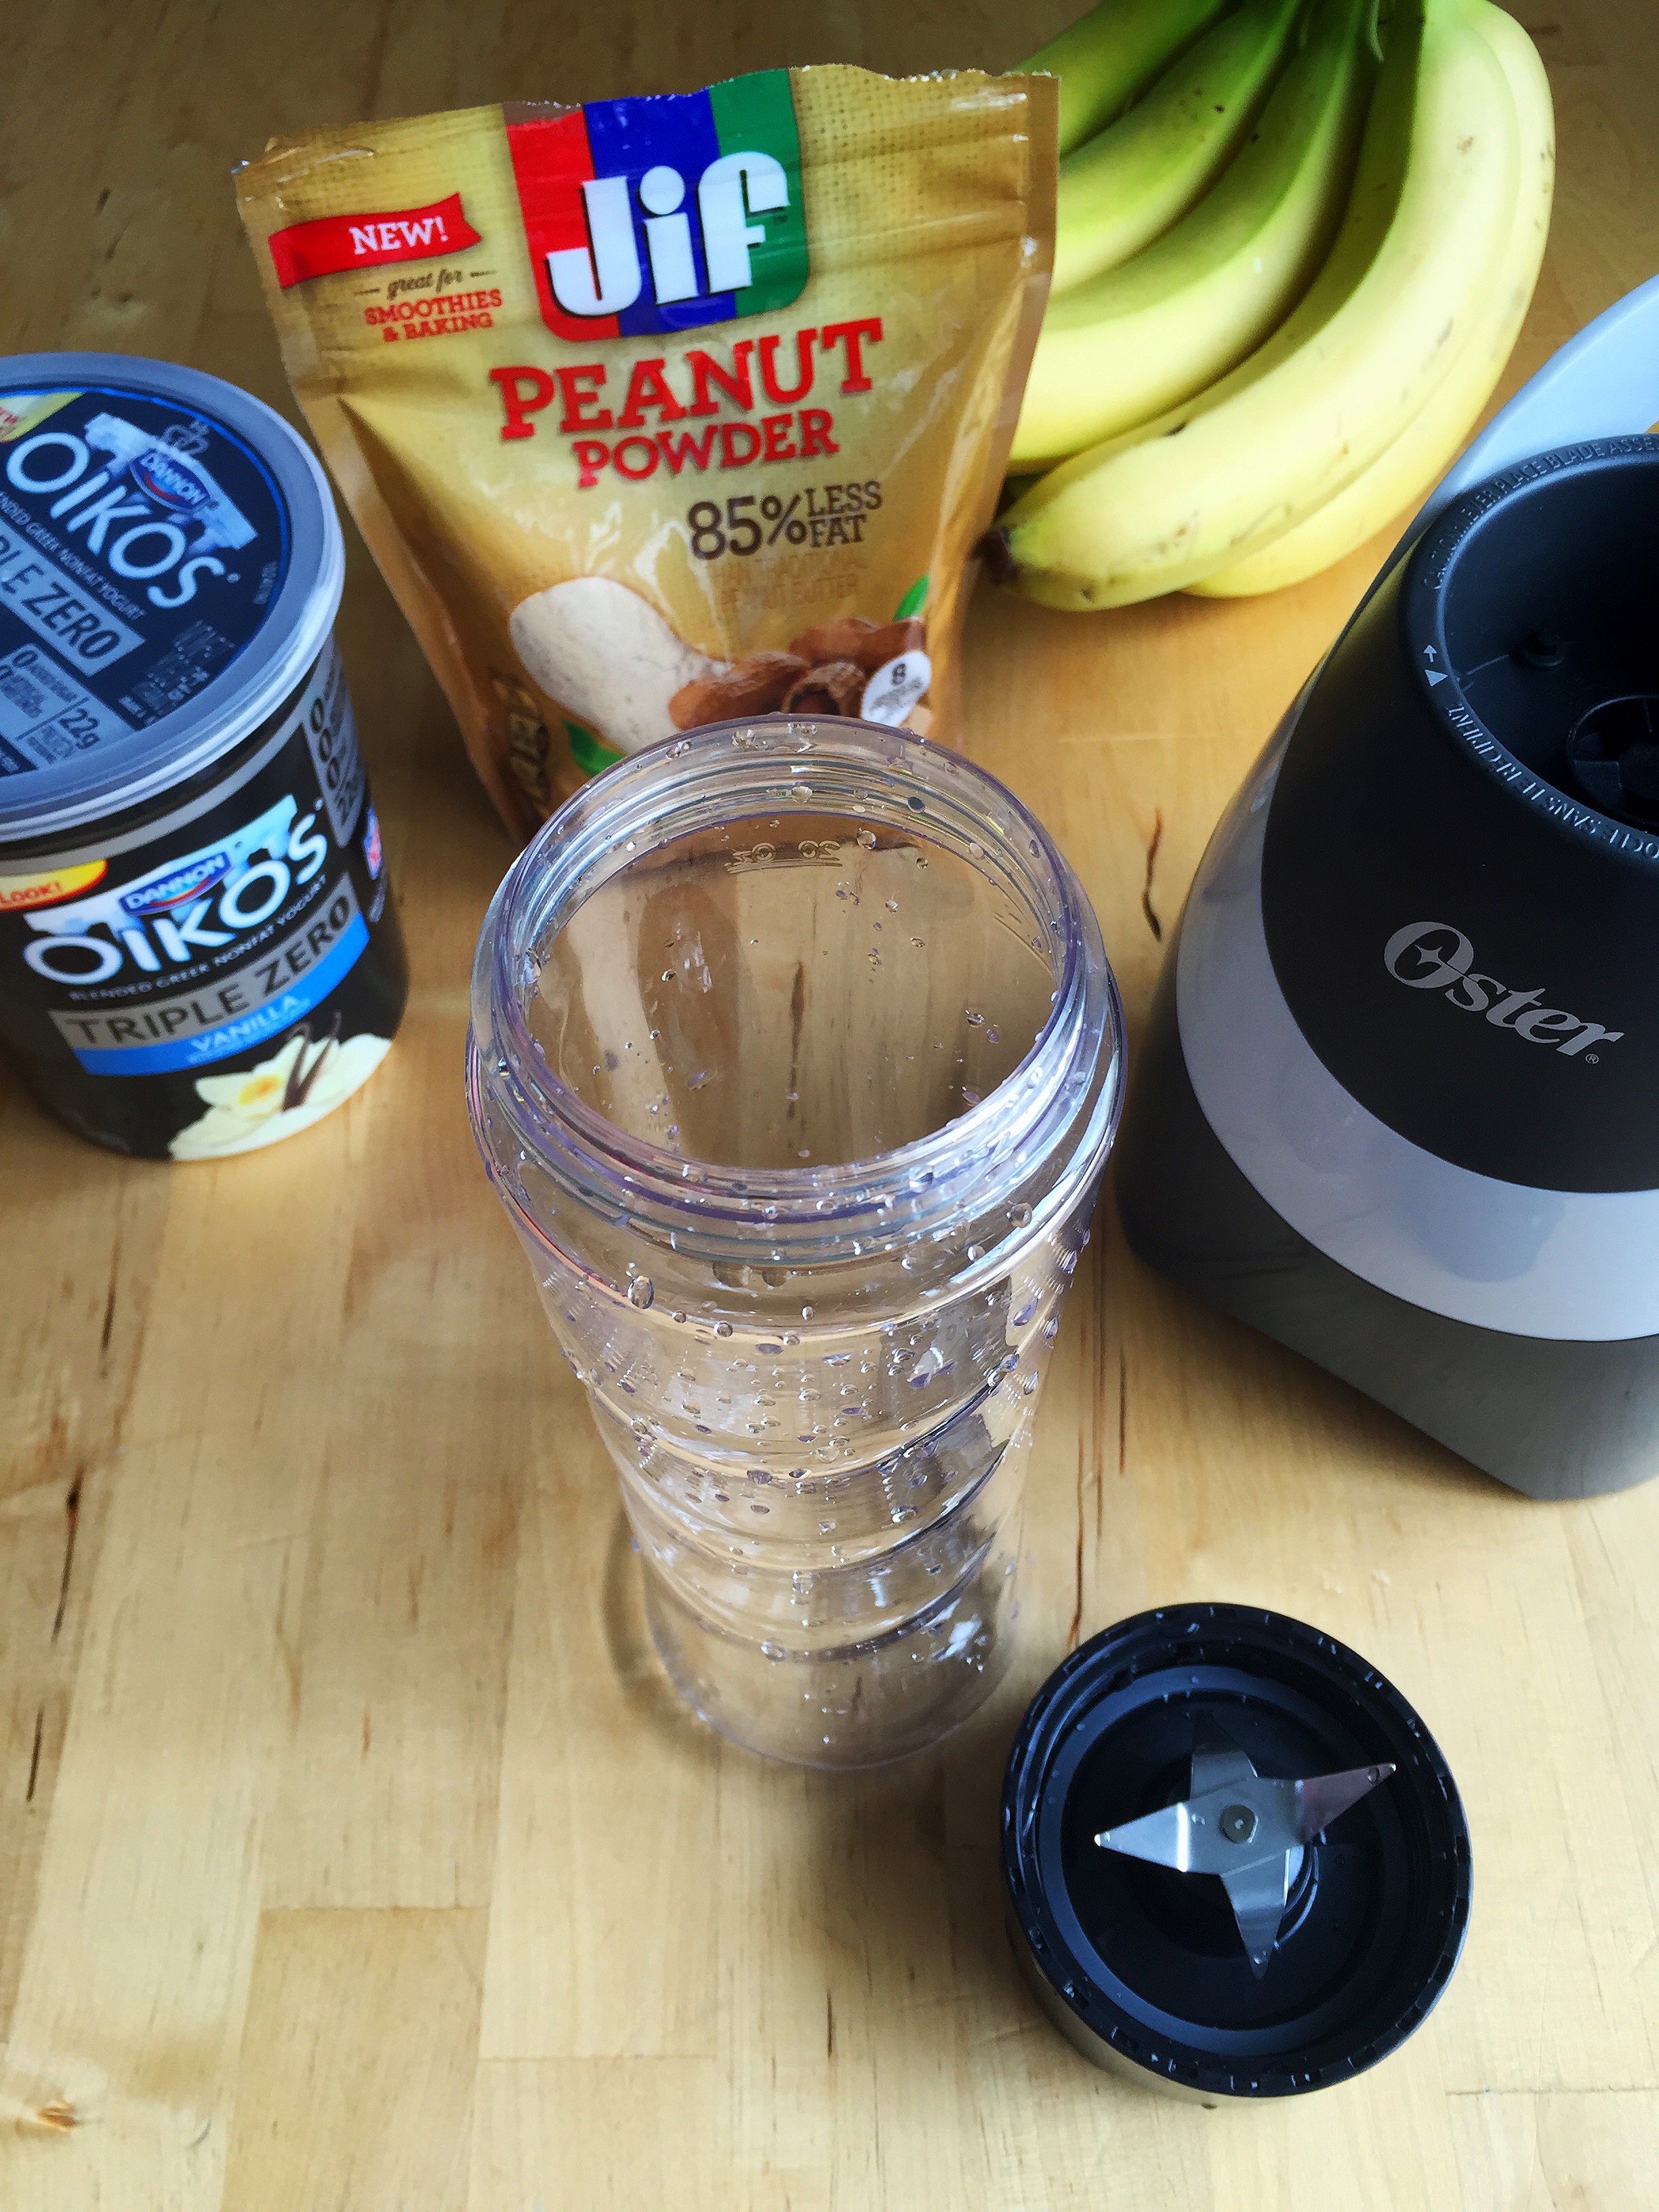 Better For You Mornings With Tasty Peanut Butter And Greek Yogurt Smoothies! © www.roastedbeanz.com #MySmoothie [AD] #CollectiveBias #shop